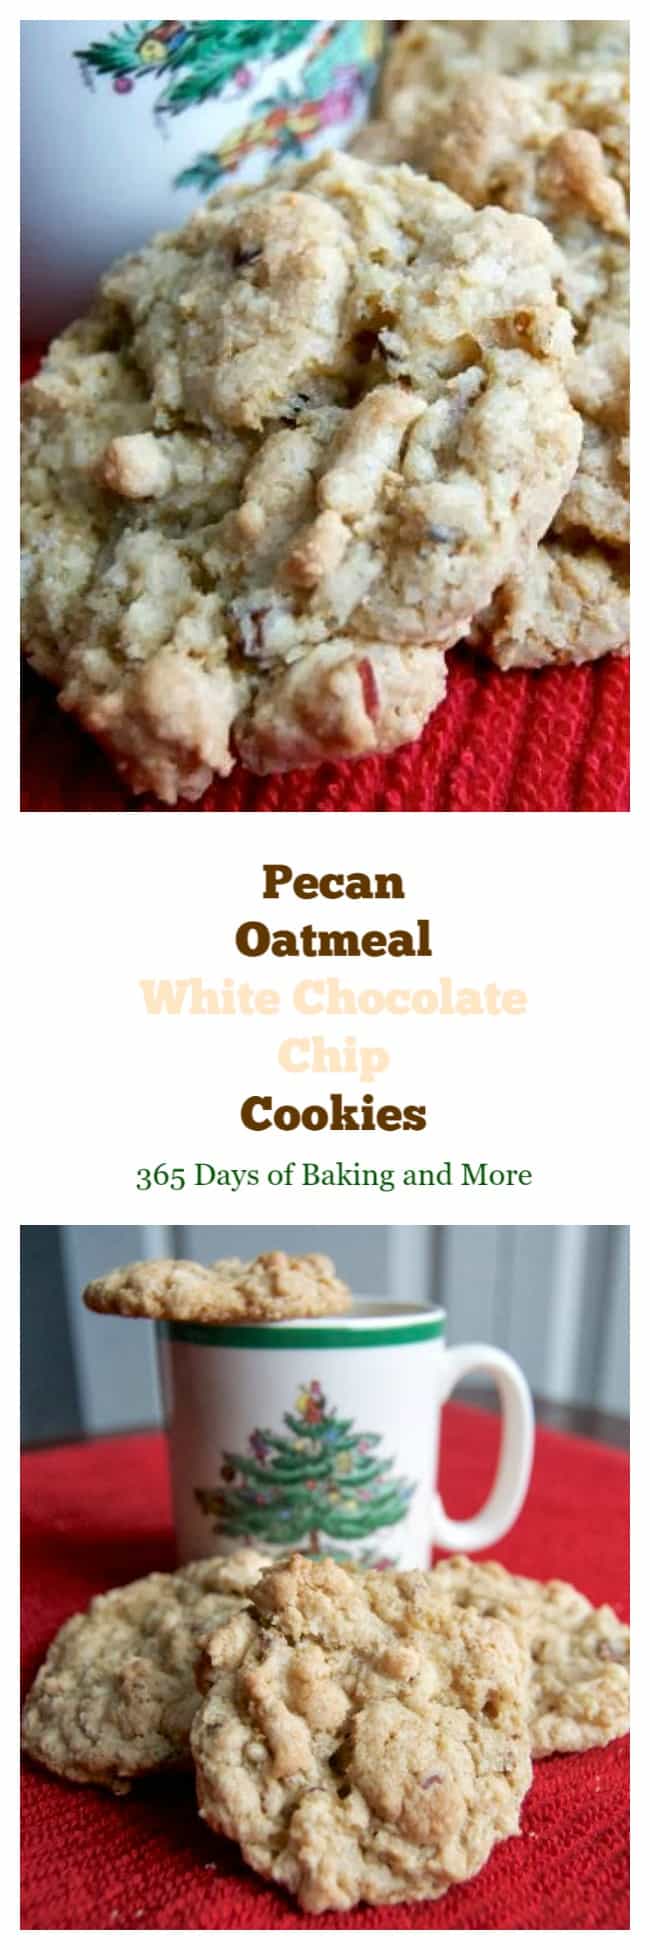 These Pecan Oatmeal White Chocolate Chip Cookies are filled with wonderful flavor and will be a highlight on any holiday cookie tray this year and beyond!